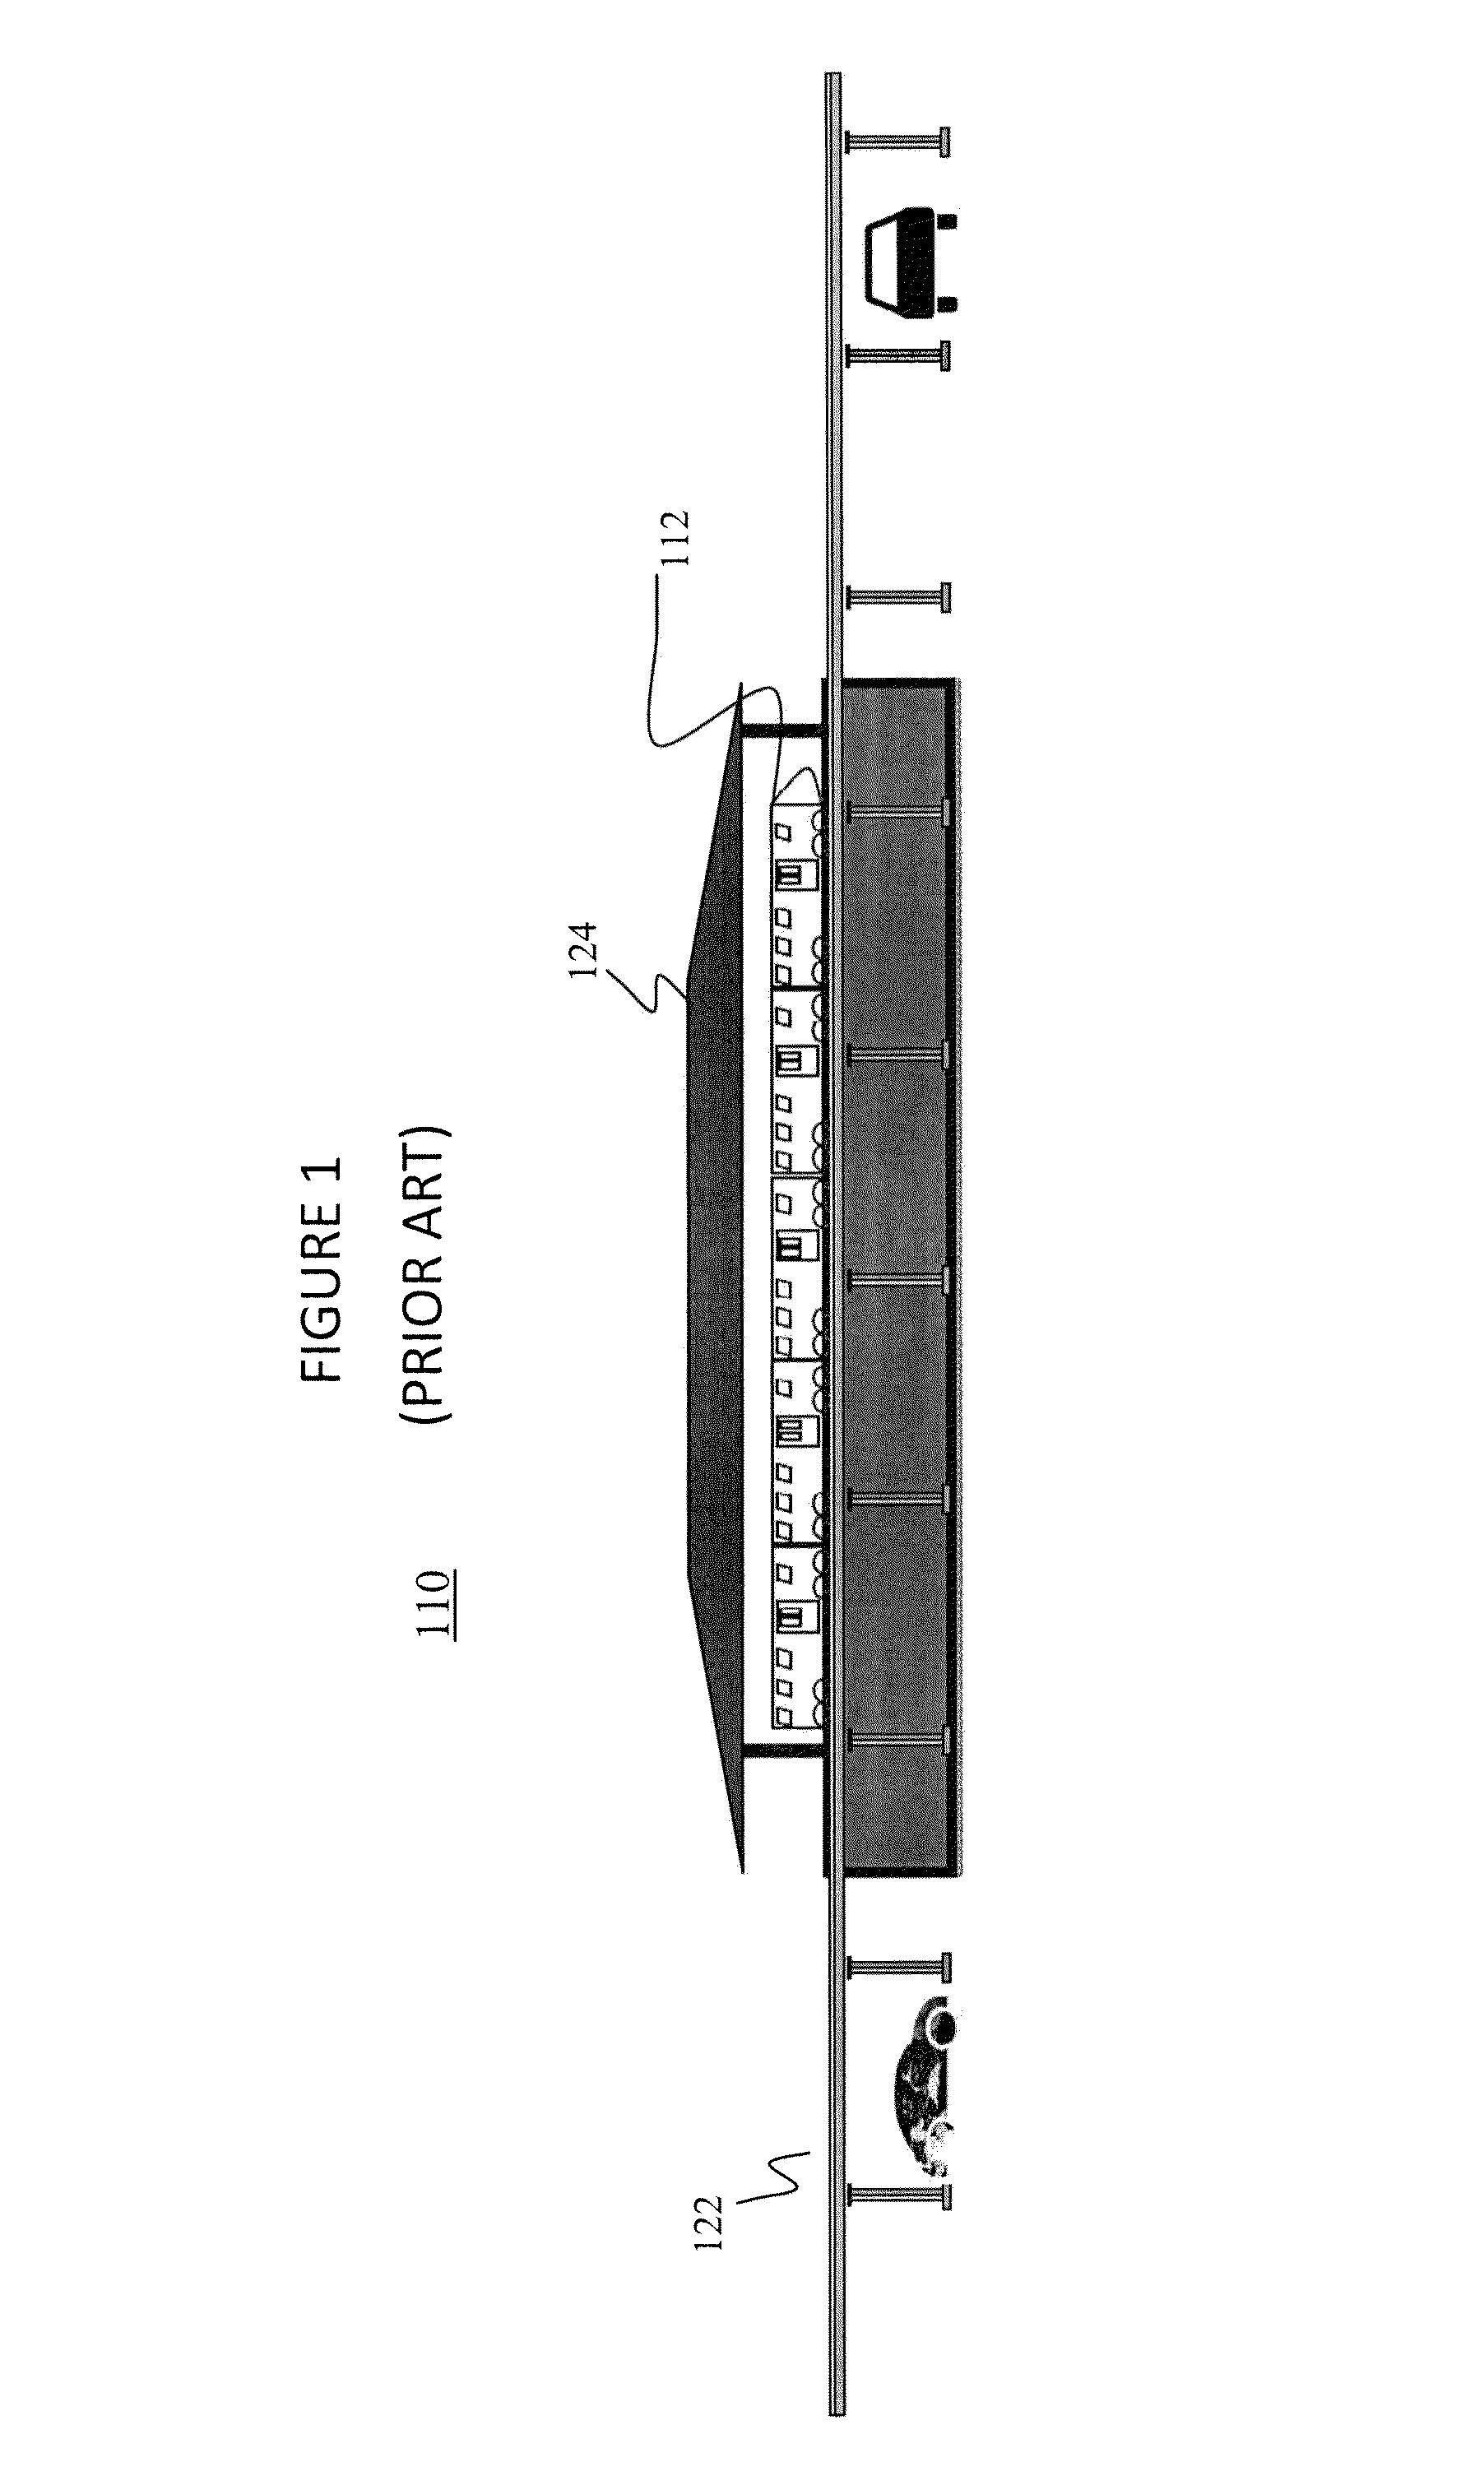 System and method of controlling vehicles to follow a defined trajectory in a complex track network